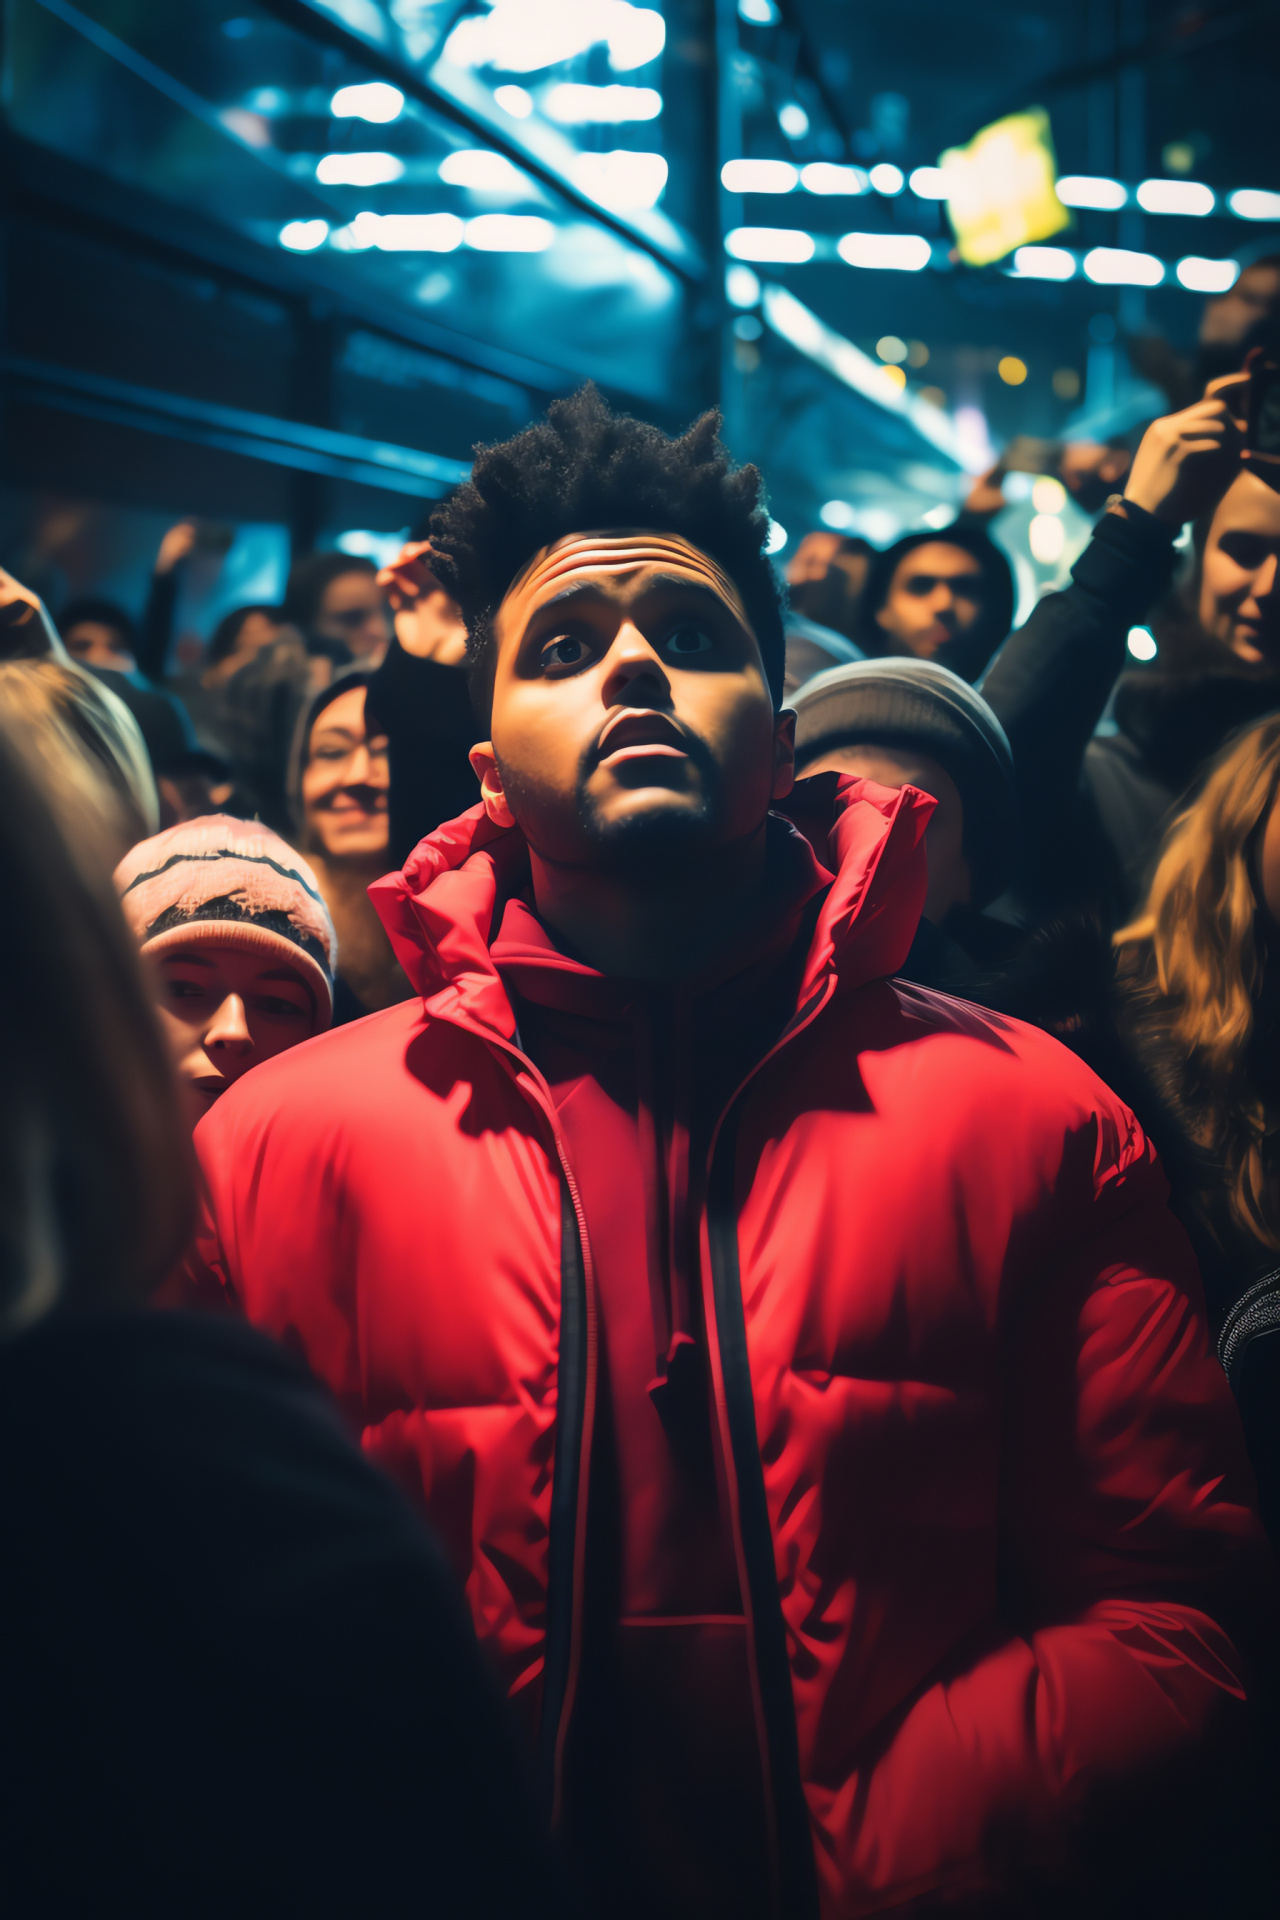 The Weeknd surrounded by concert fans, energetic live performance, striking vibrant red jacket, arms raised in song, HD Phone Image